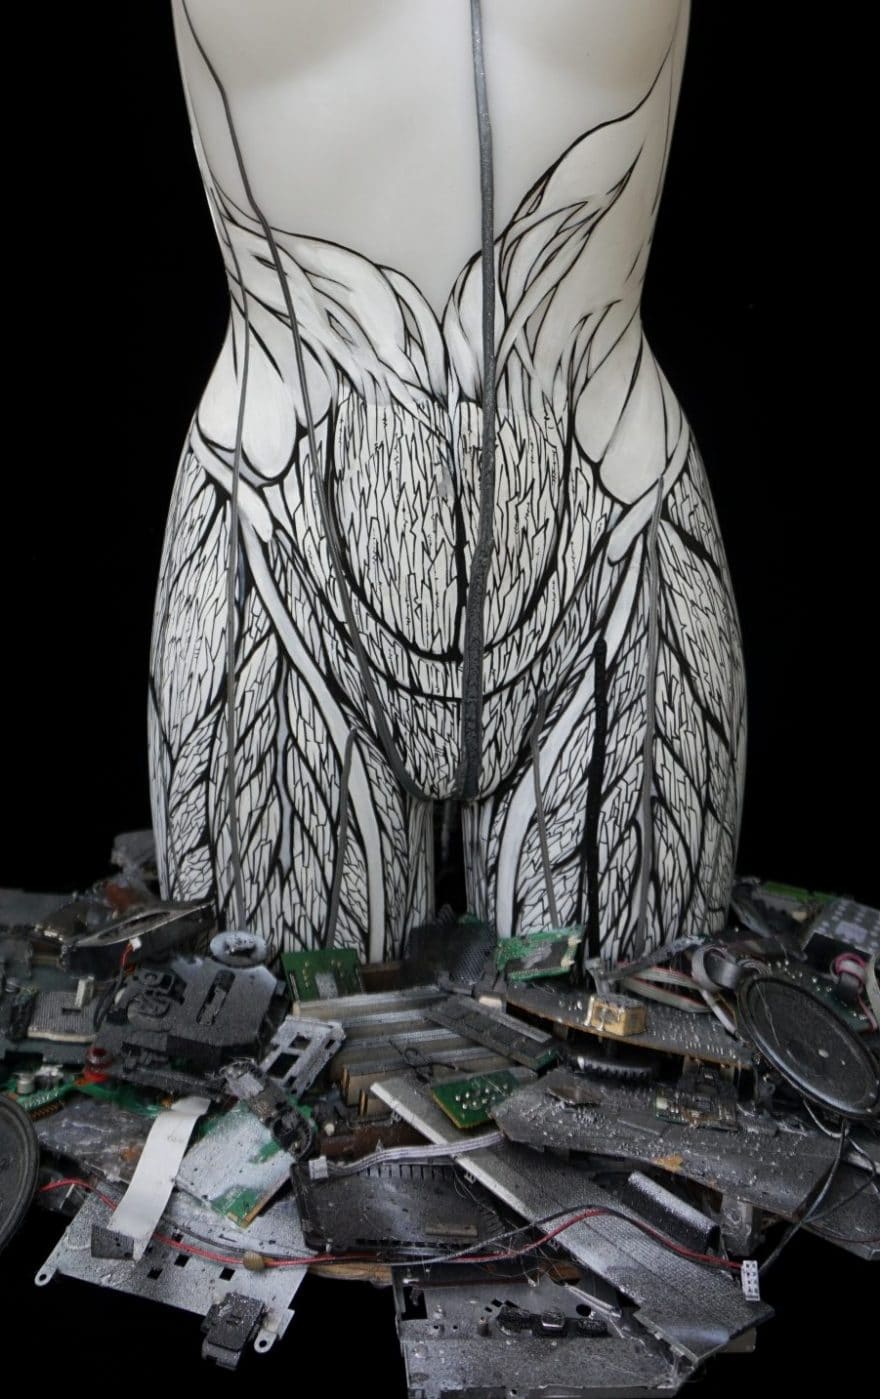 Eve-future-détail anatomy-recycling cyberpunk-installation-sculpture-Marie-Catherine Arrighi